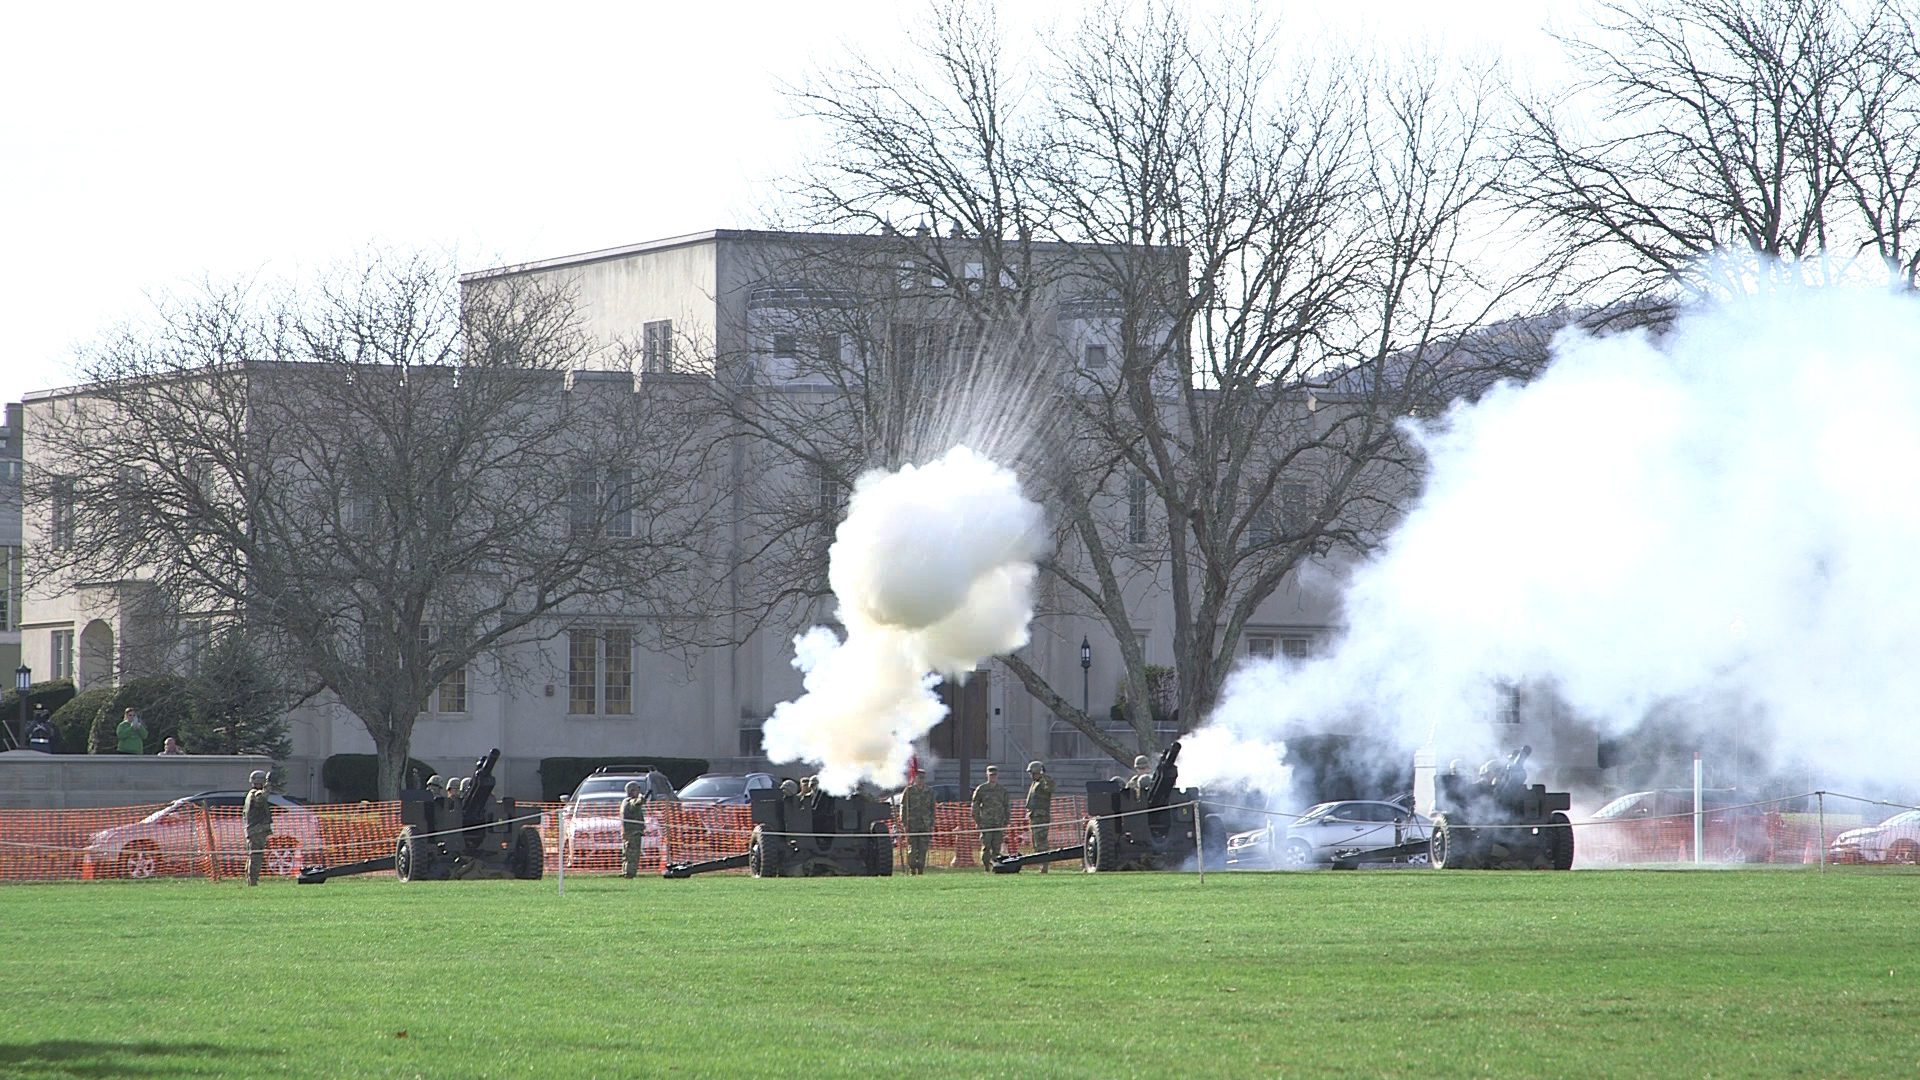 Howitzers being fired on Parade Ground